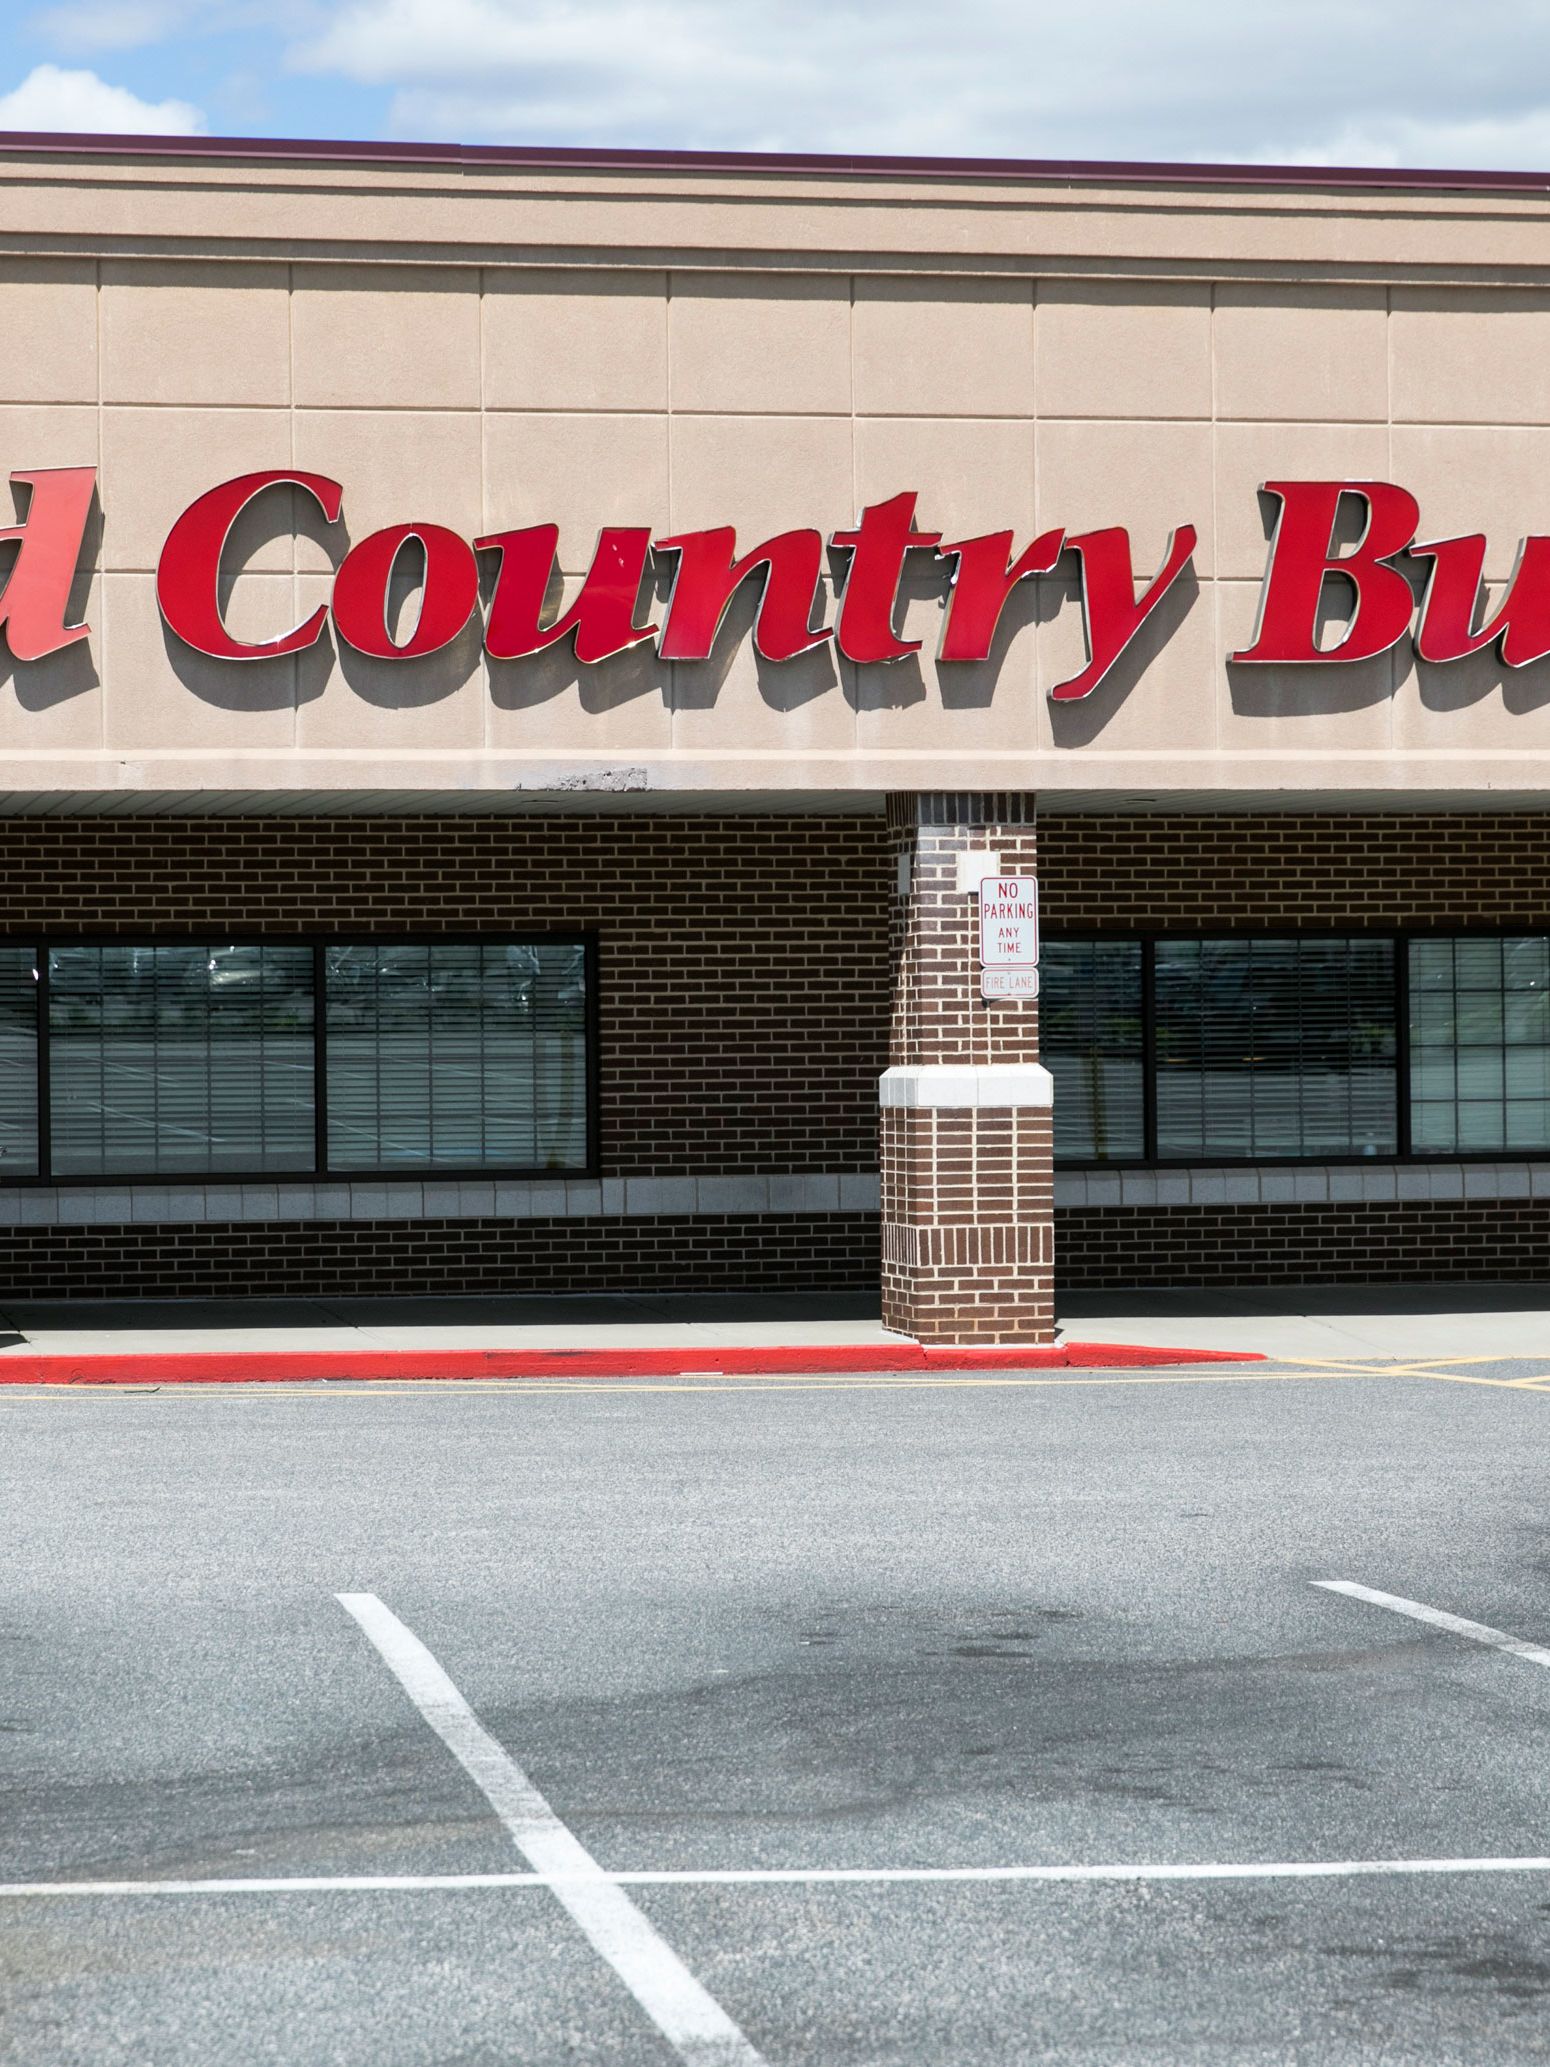 The parent company of Old Country Buffet filed for bankruptcy | CNN Business